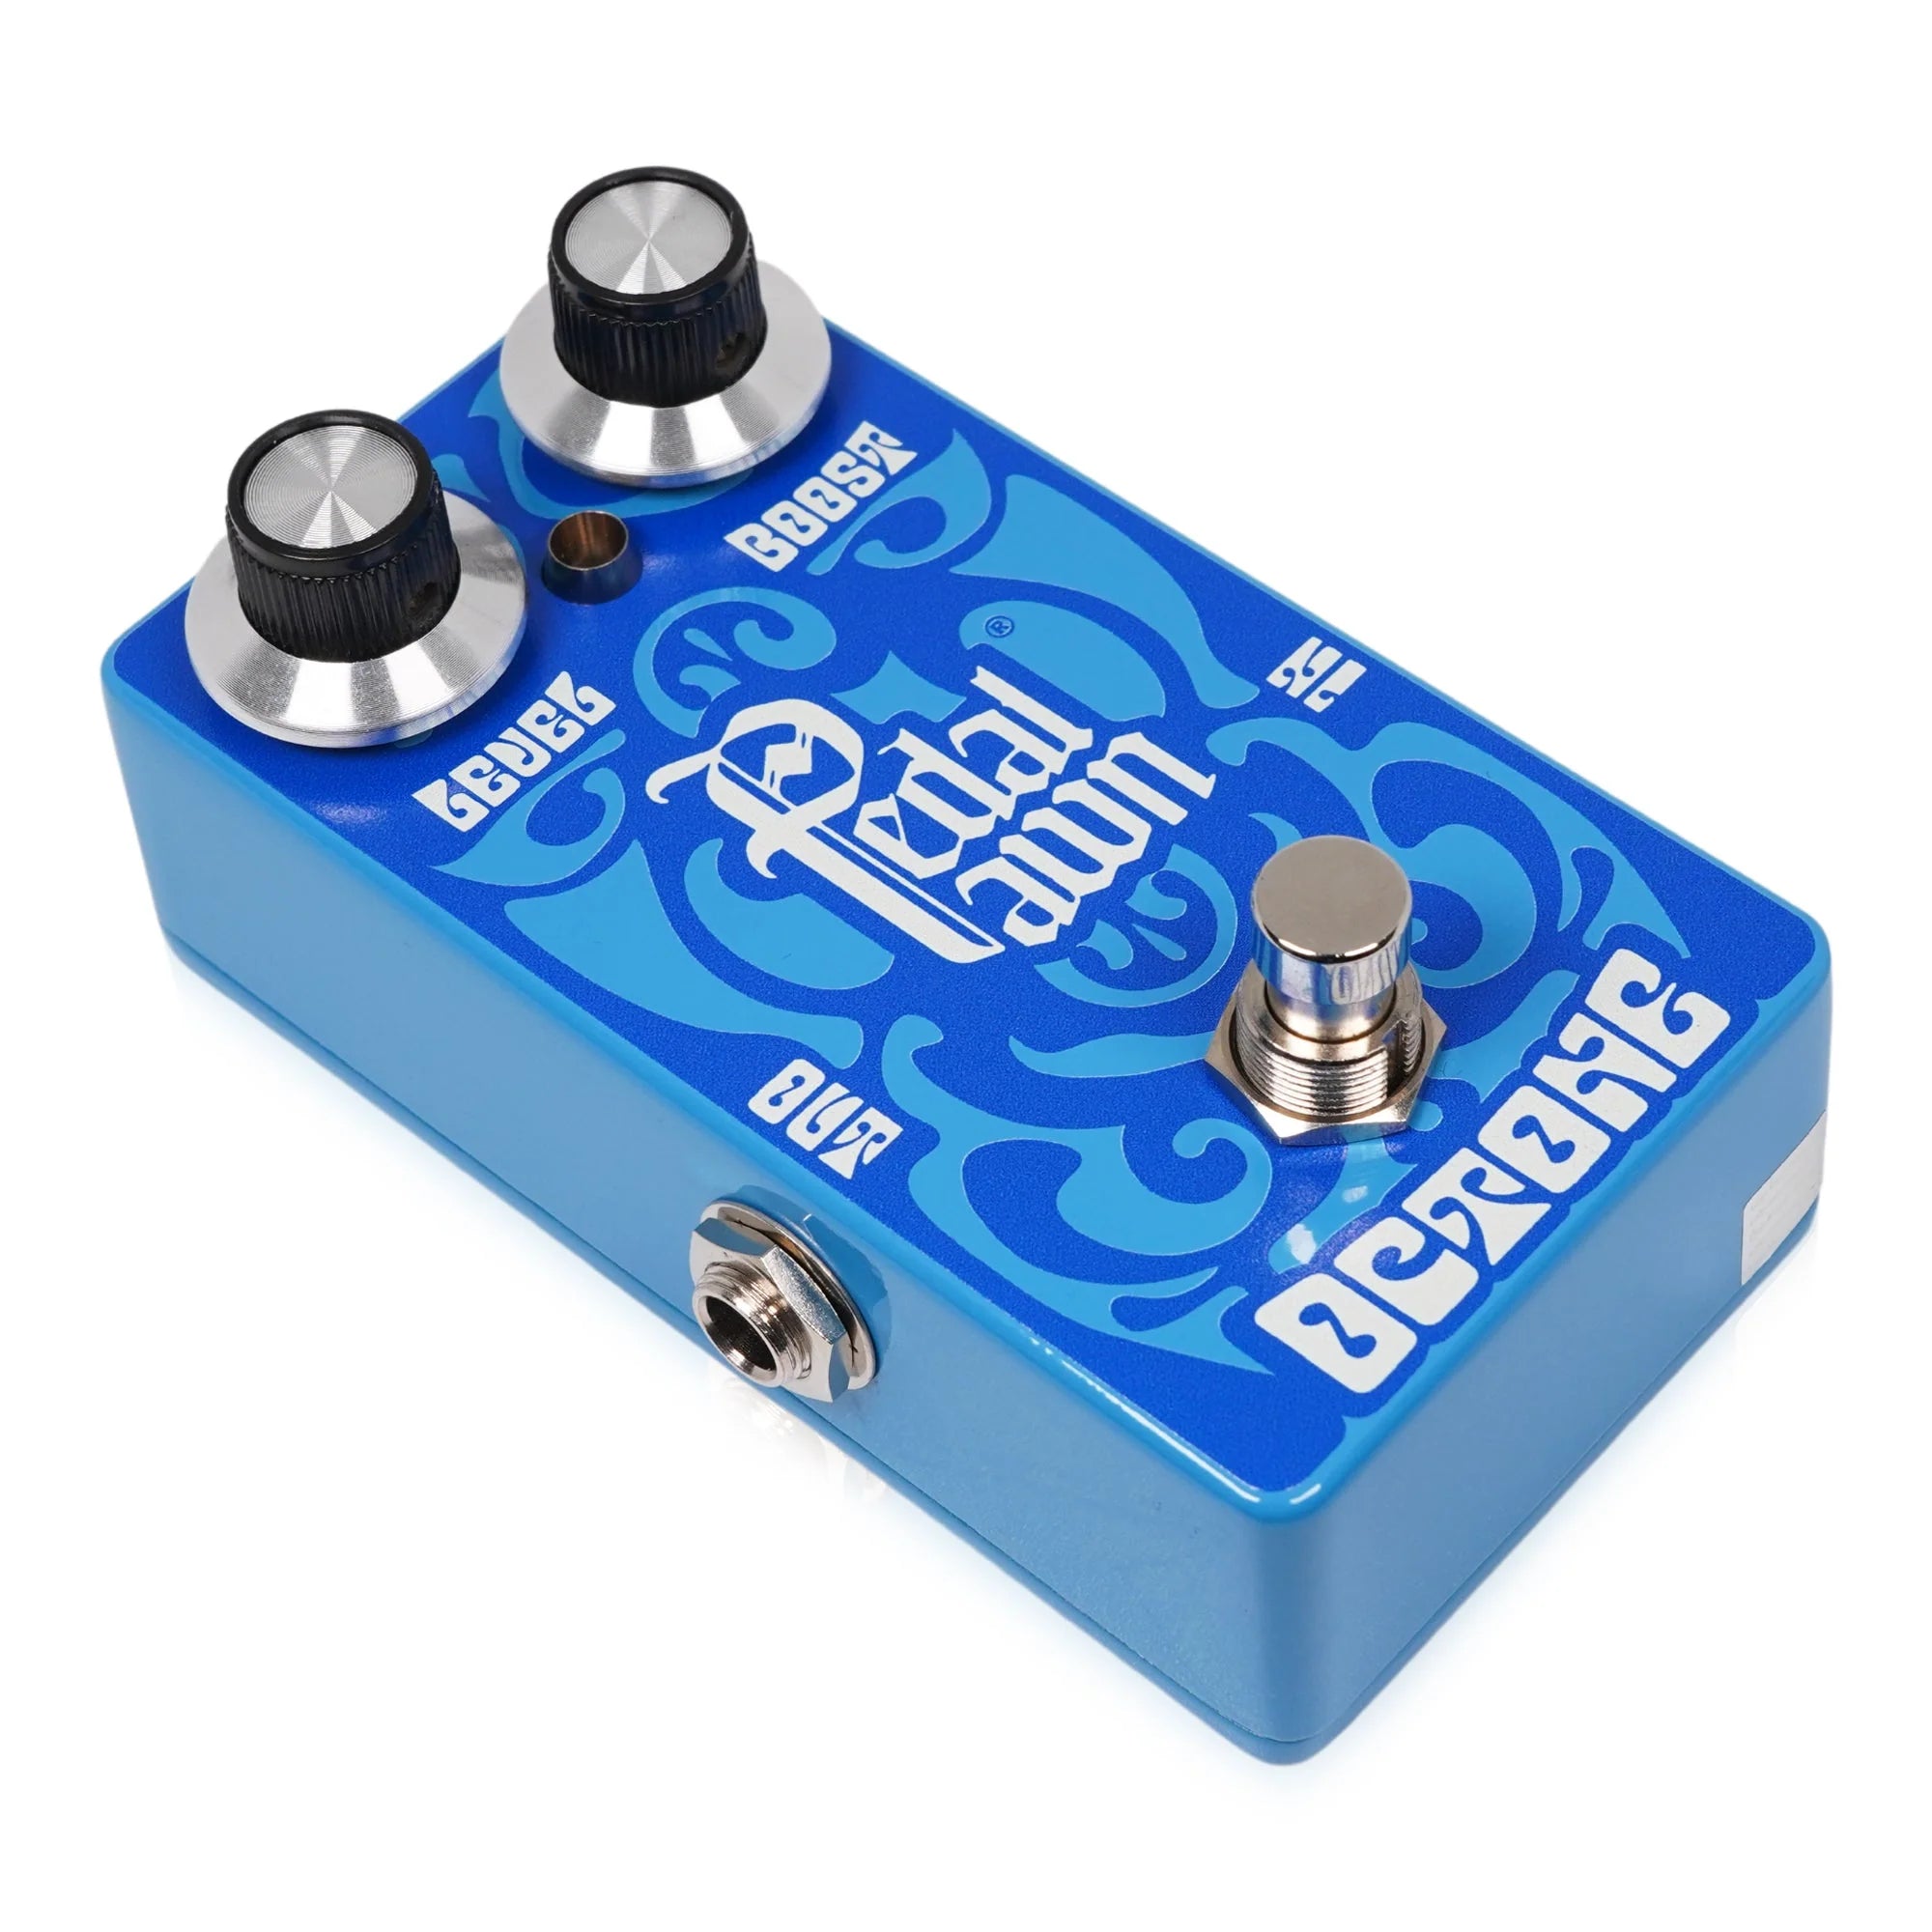 OCTONE ™ – Pedal Pawn